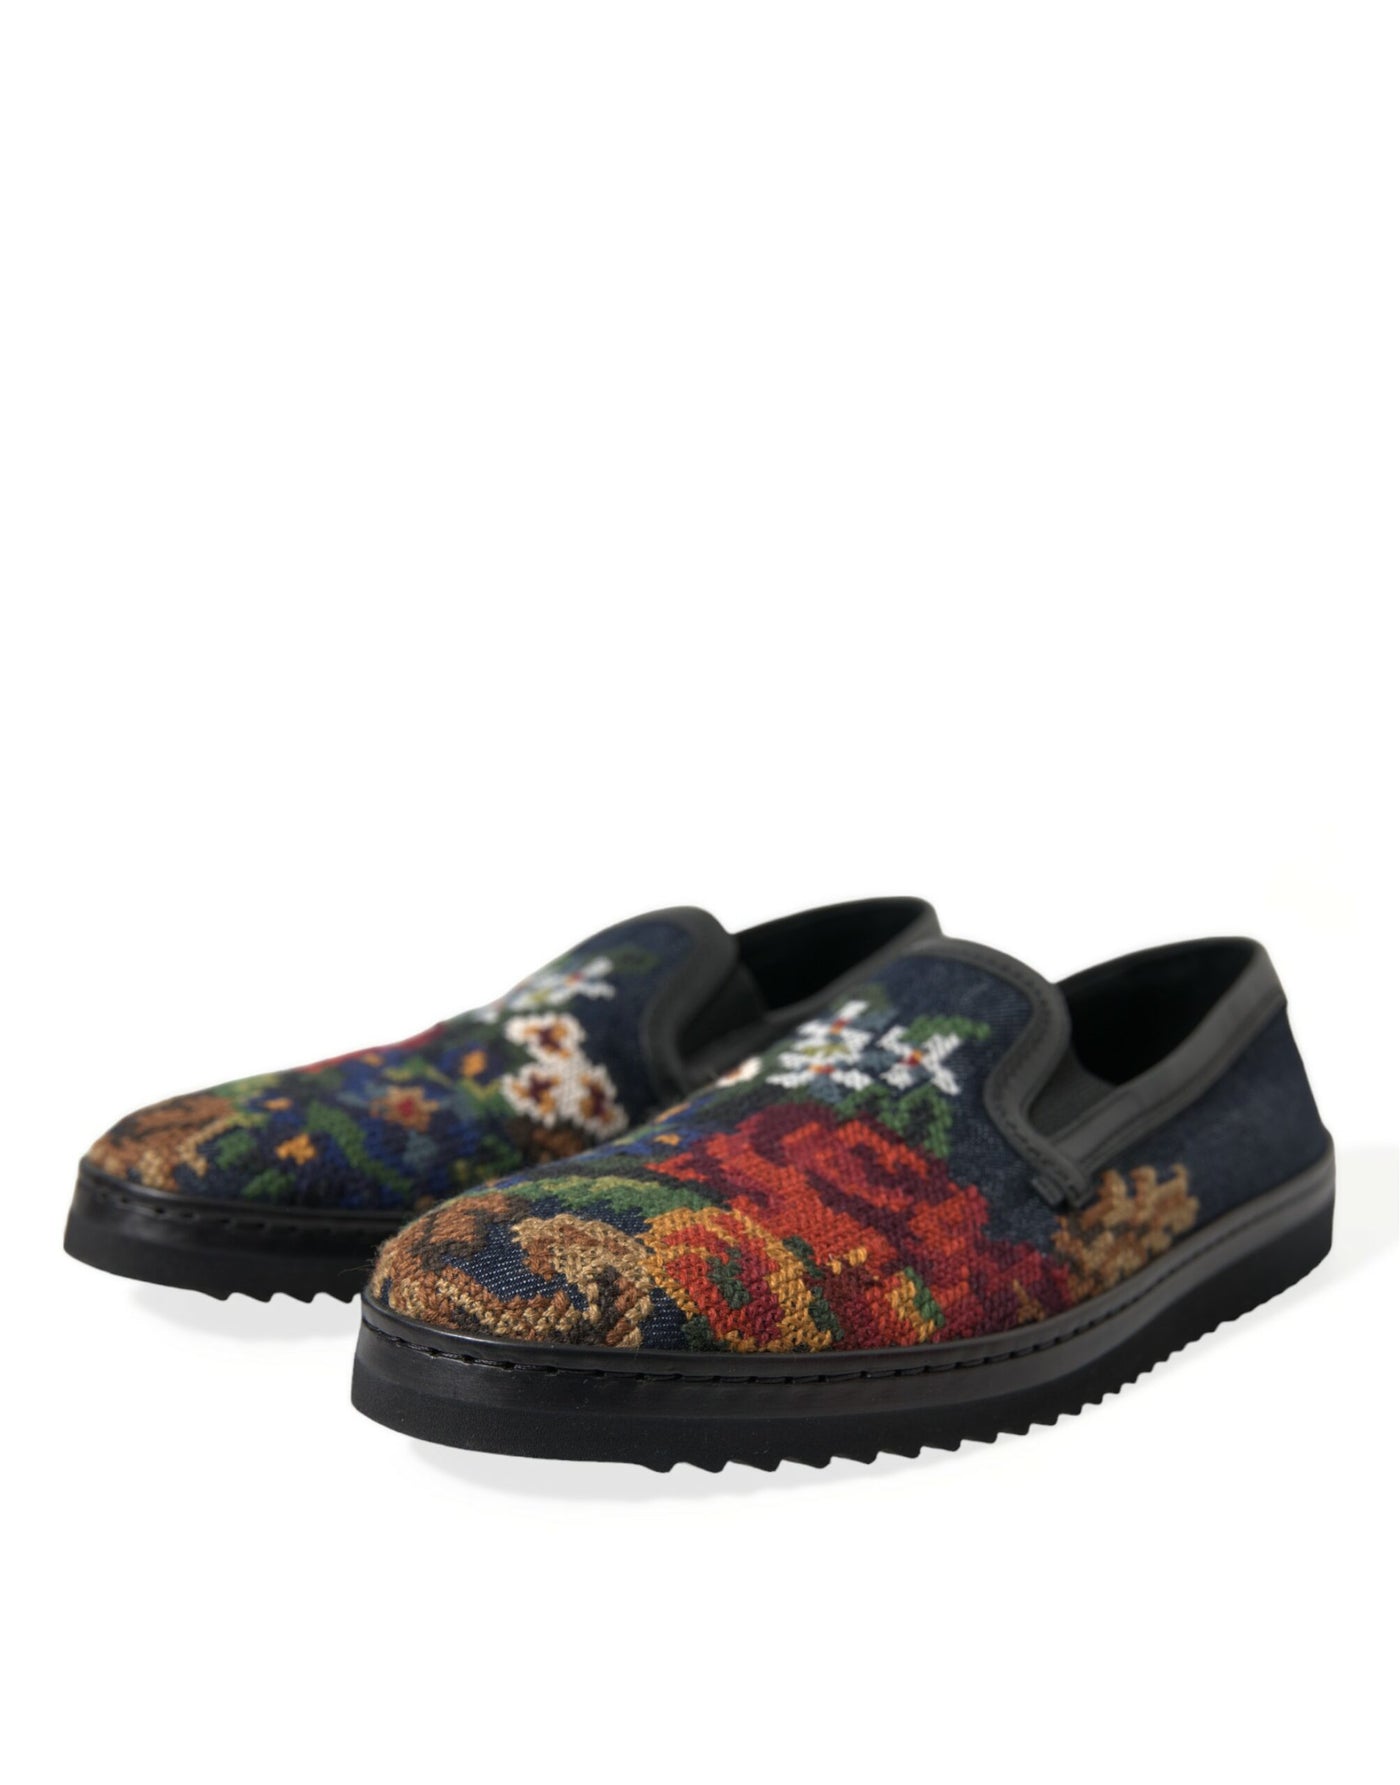 Dolce & Gabbana Multicolor Floral Slippers Men Loafers Shoes